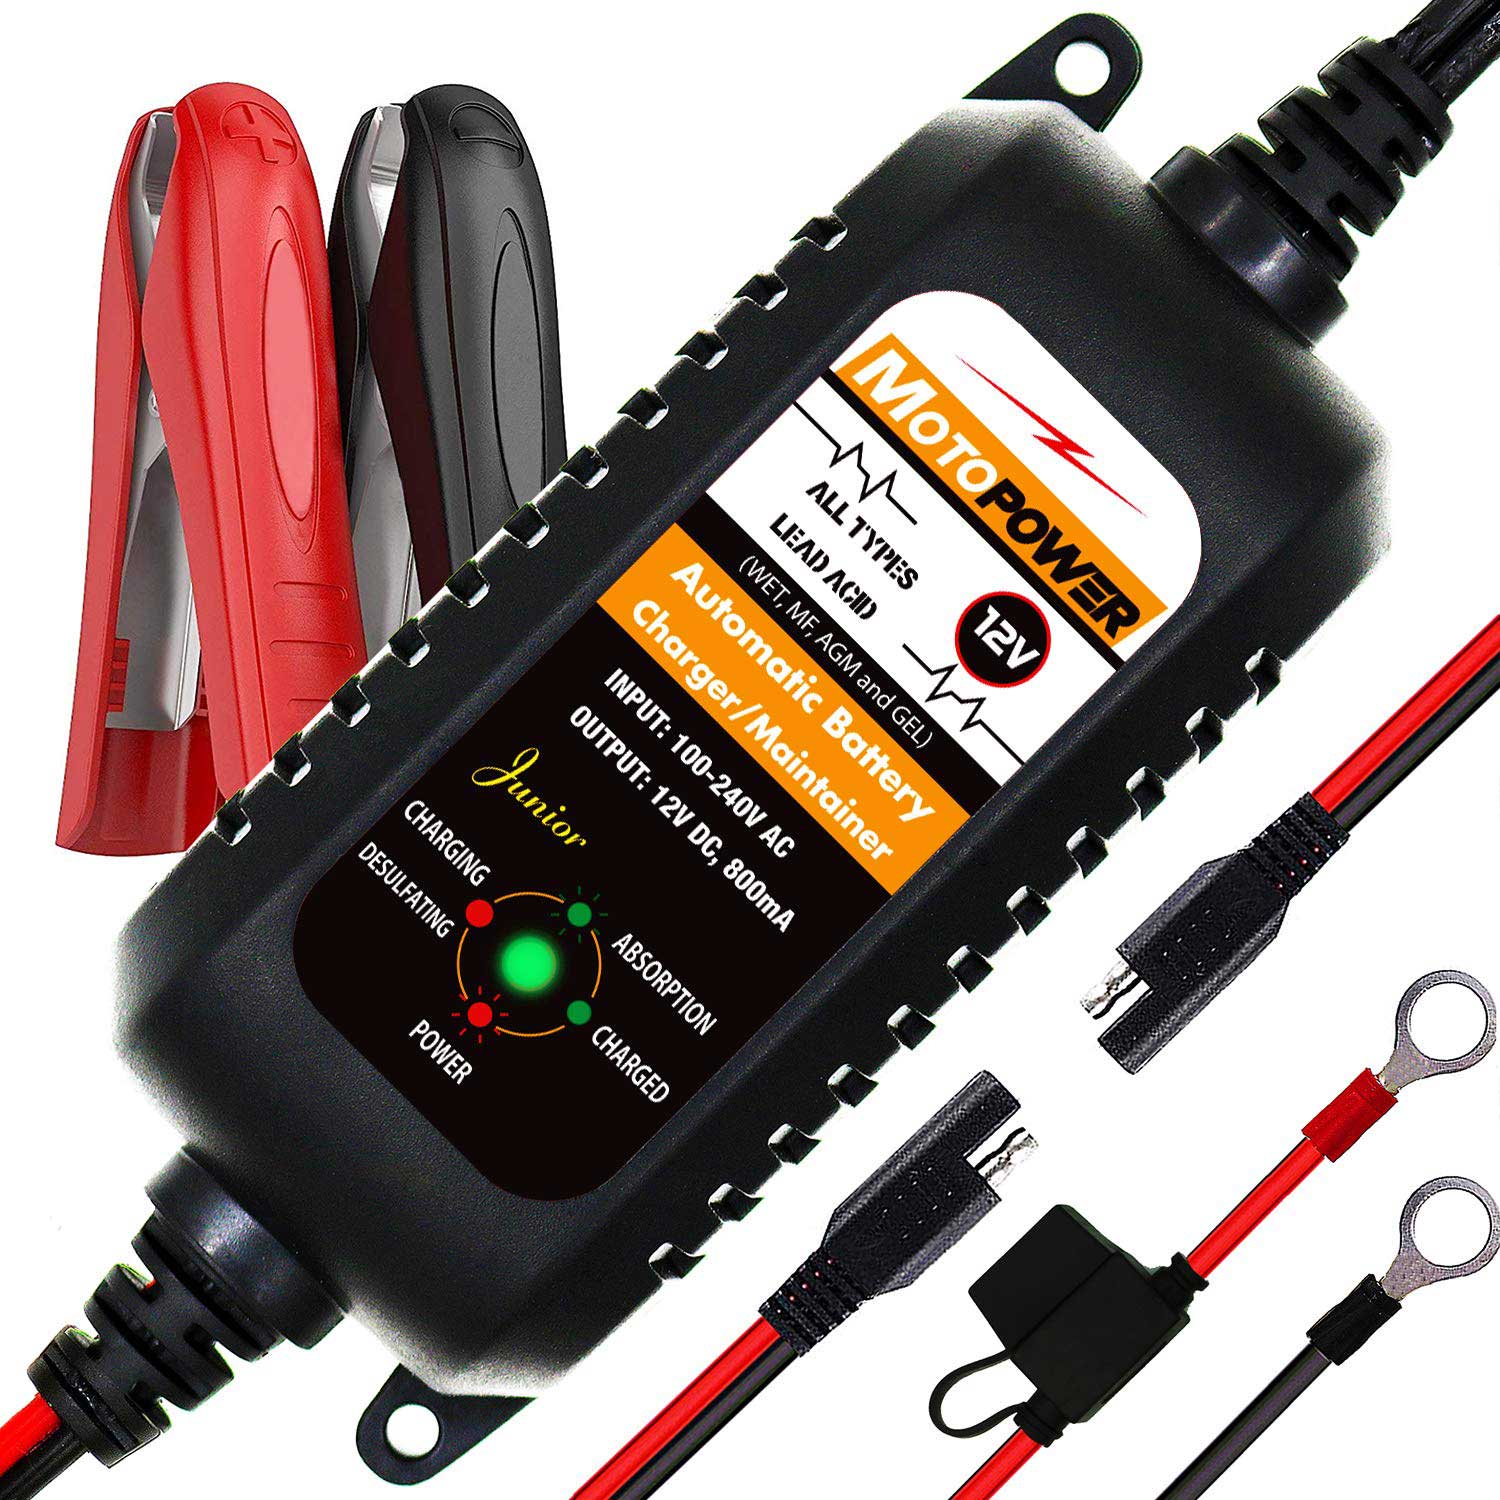 Motopower MP00205A 12V 800mA Fully Automatic Battery Charger/Maintainer